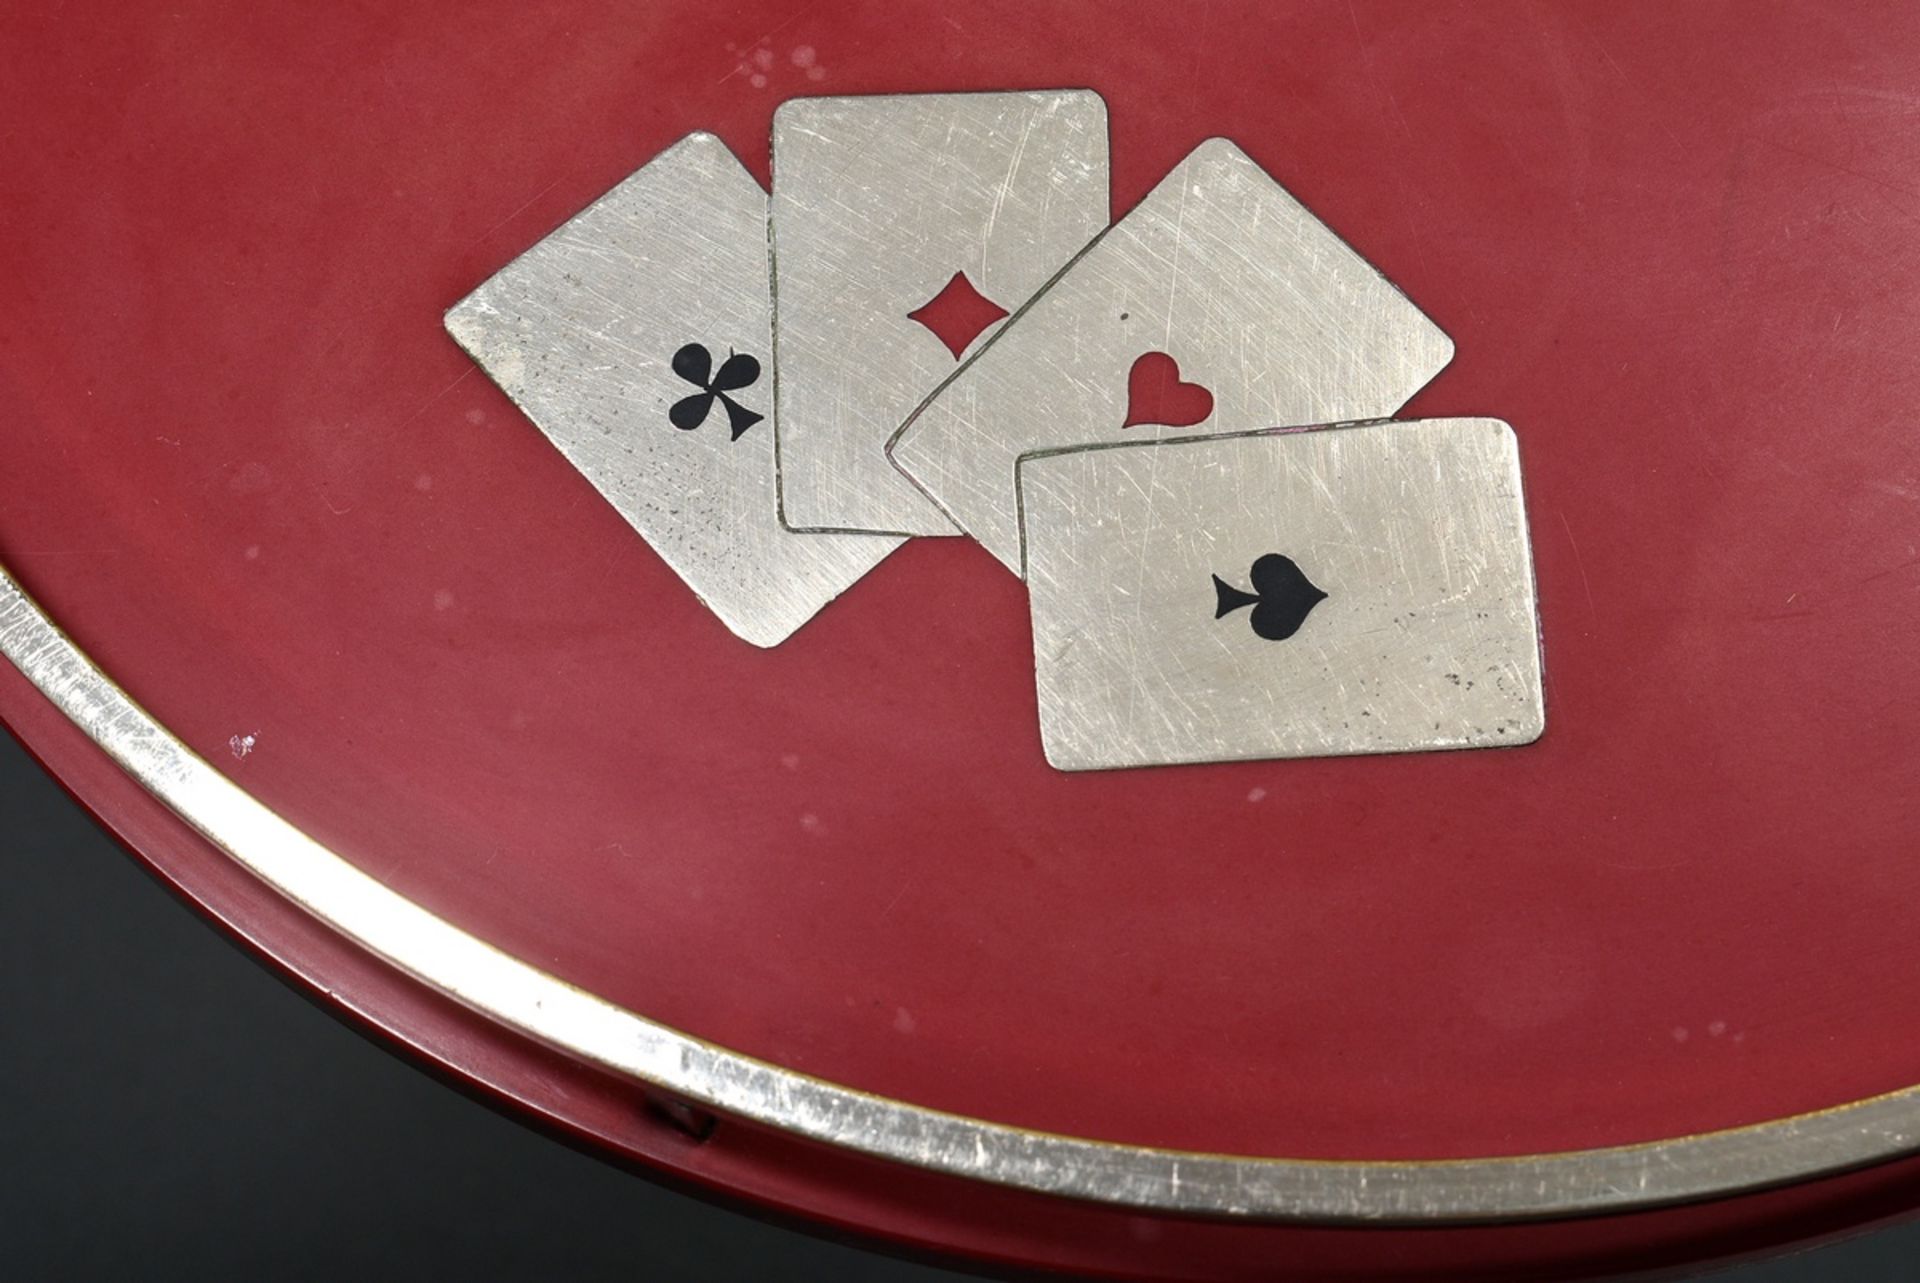 Red Art Deco Bakkelite tray with chrome handles and rim as well as inlaid "playing cards", around 1 - Image 2 of 4